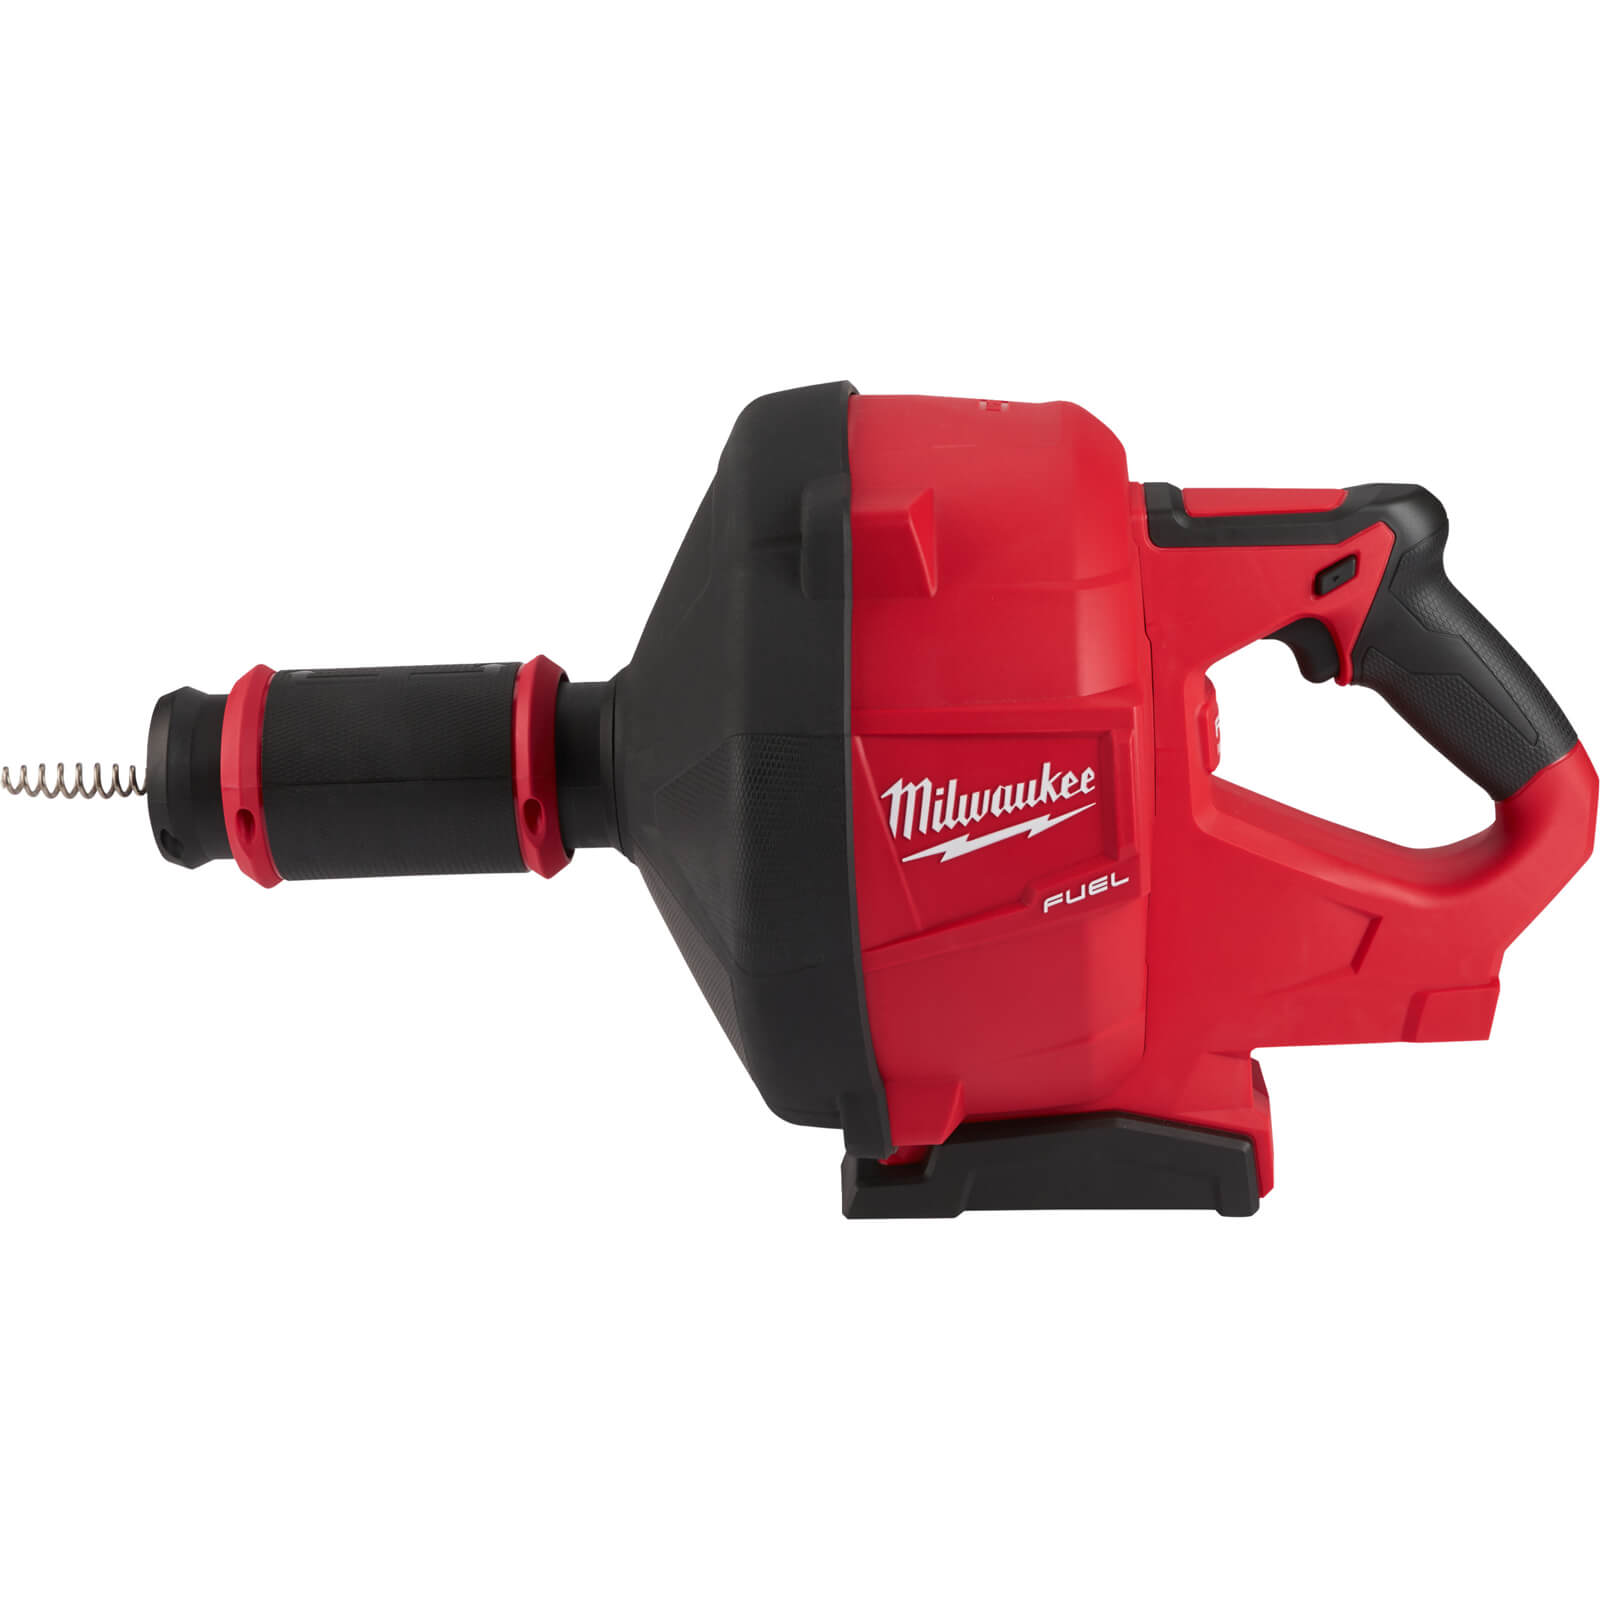 Milwaukee M18 FDCPF8 Fuel 18v Cordless Brushless Drain Cleaner No Batteries No Charger No Case